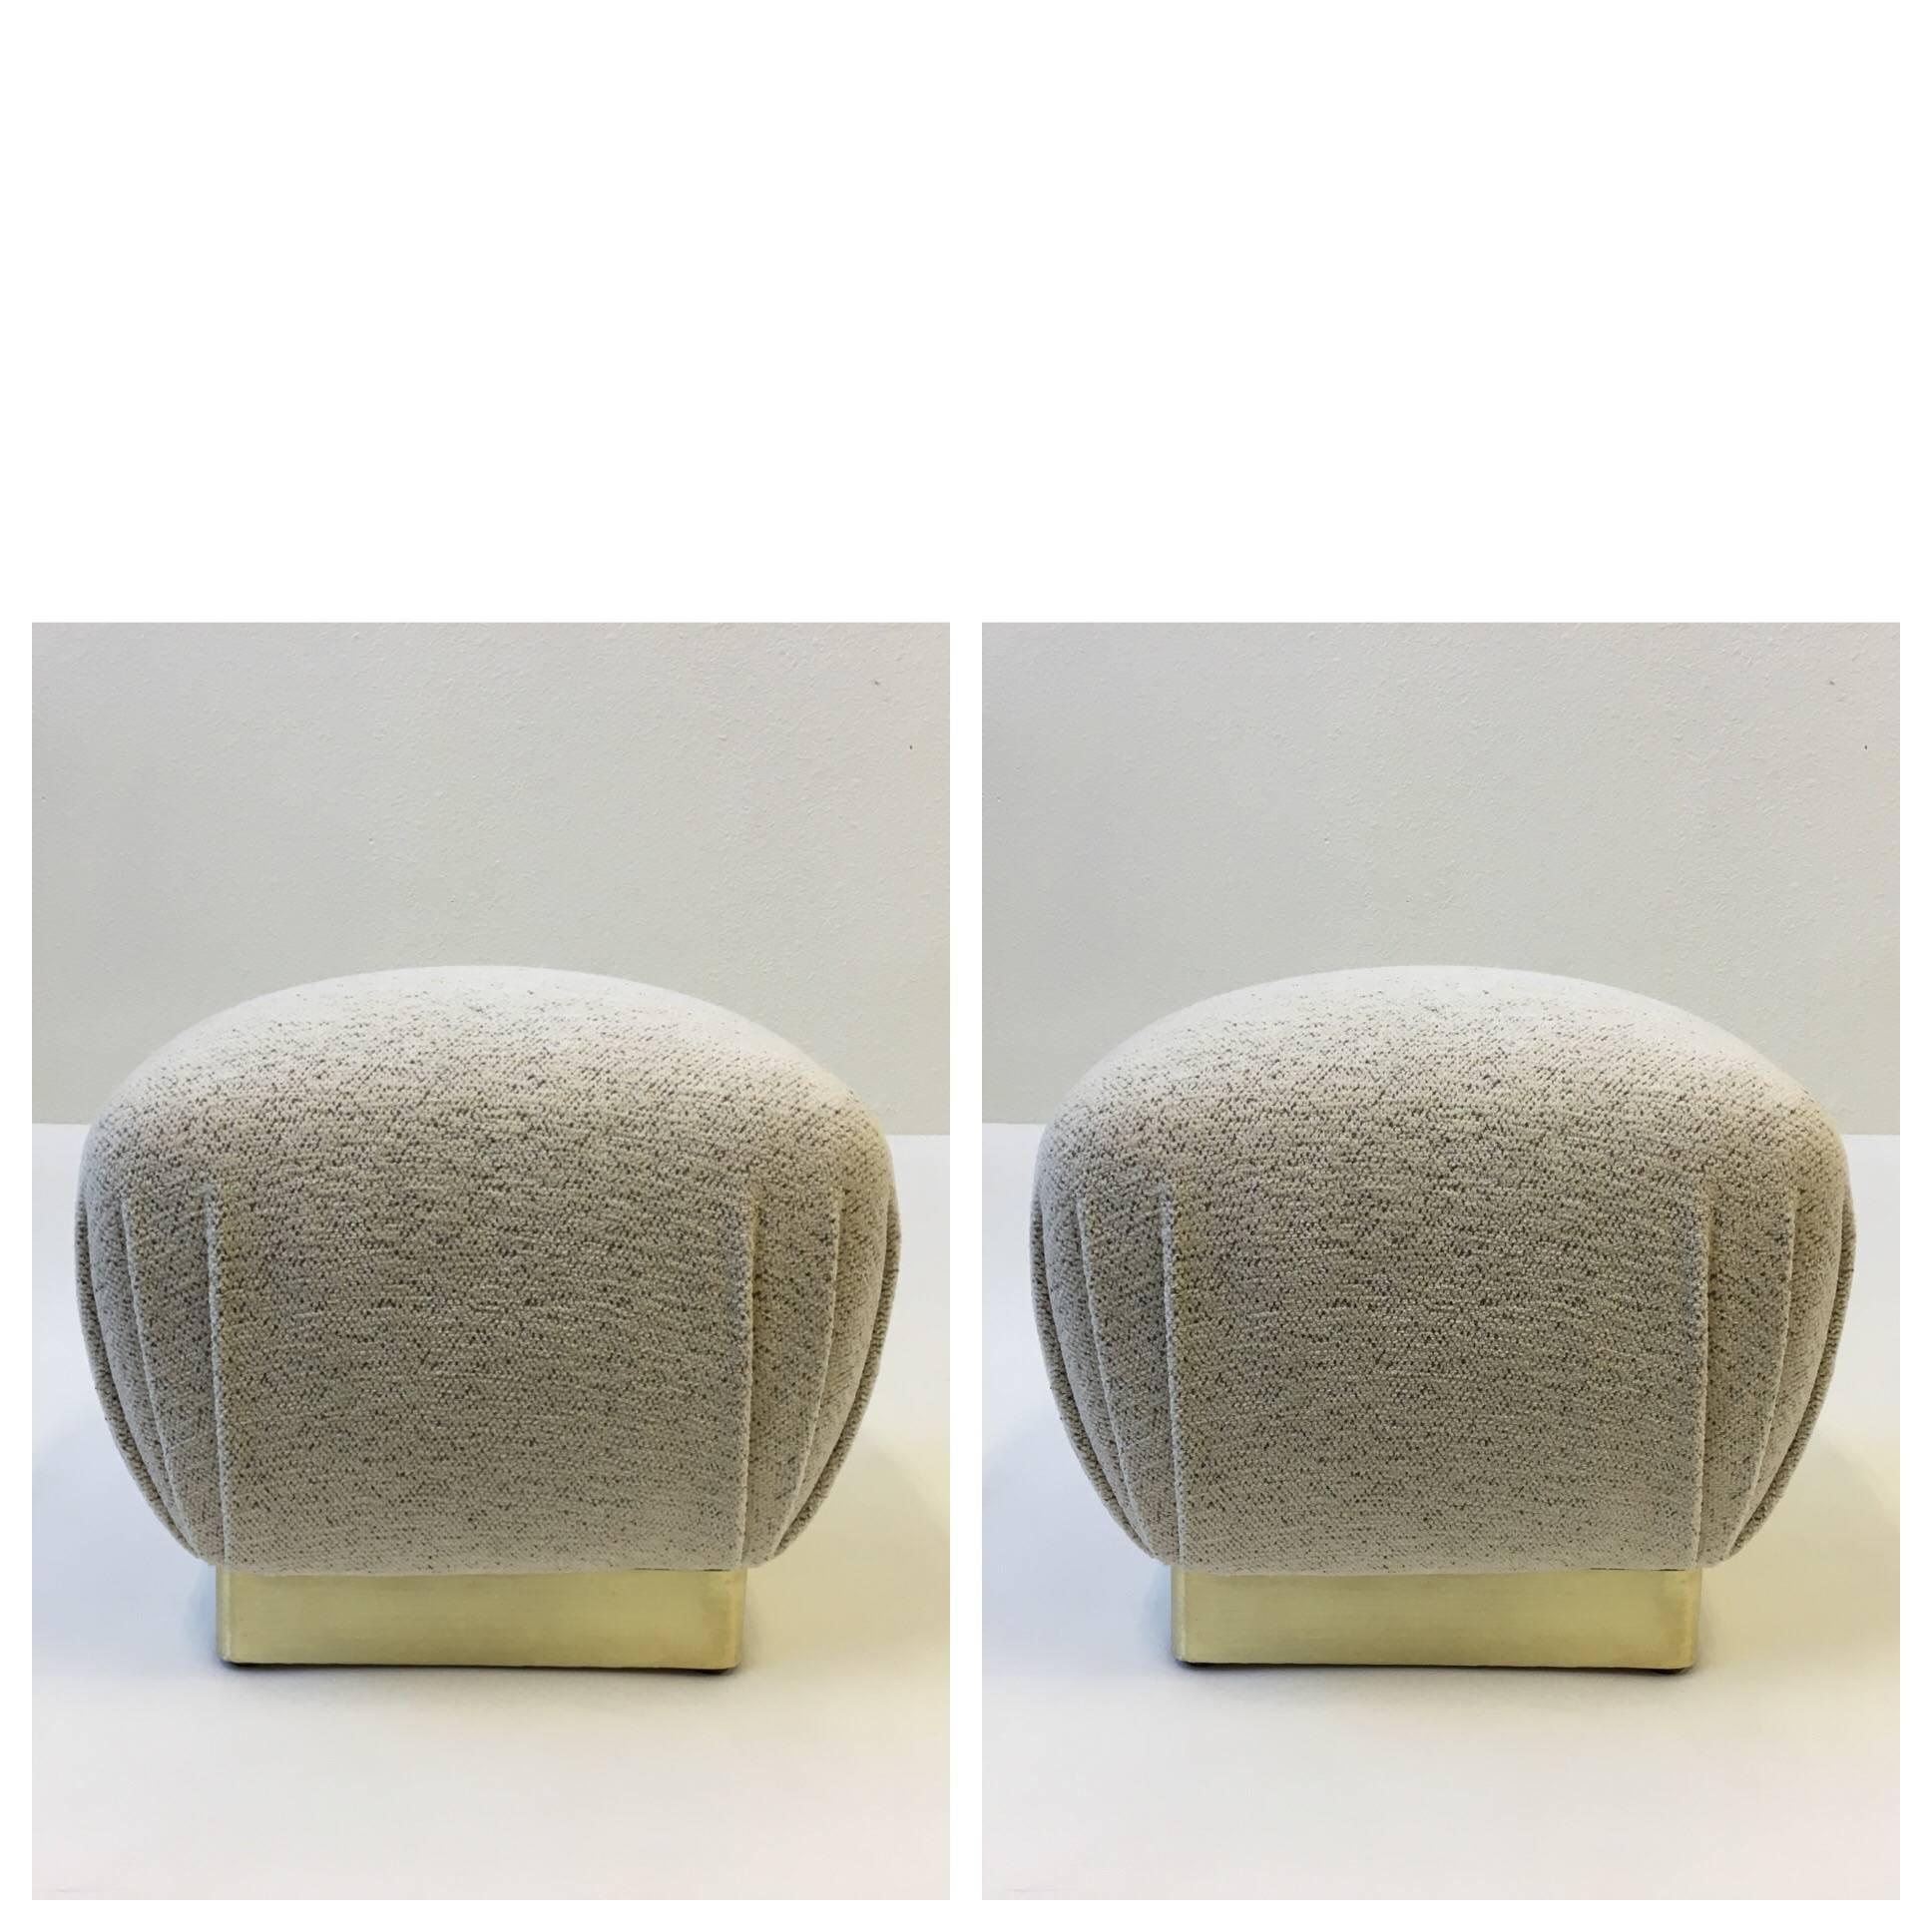 A pair of glamorous poufs designed in 1970s by Marge Carson. Newly recovered in a off-white with hints of light brown spots Chanel fabric, the base I'd wood covered with a satin brass band. One of the poufs retains a label.
Dimensions: 17